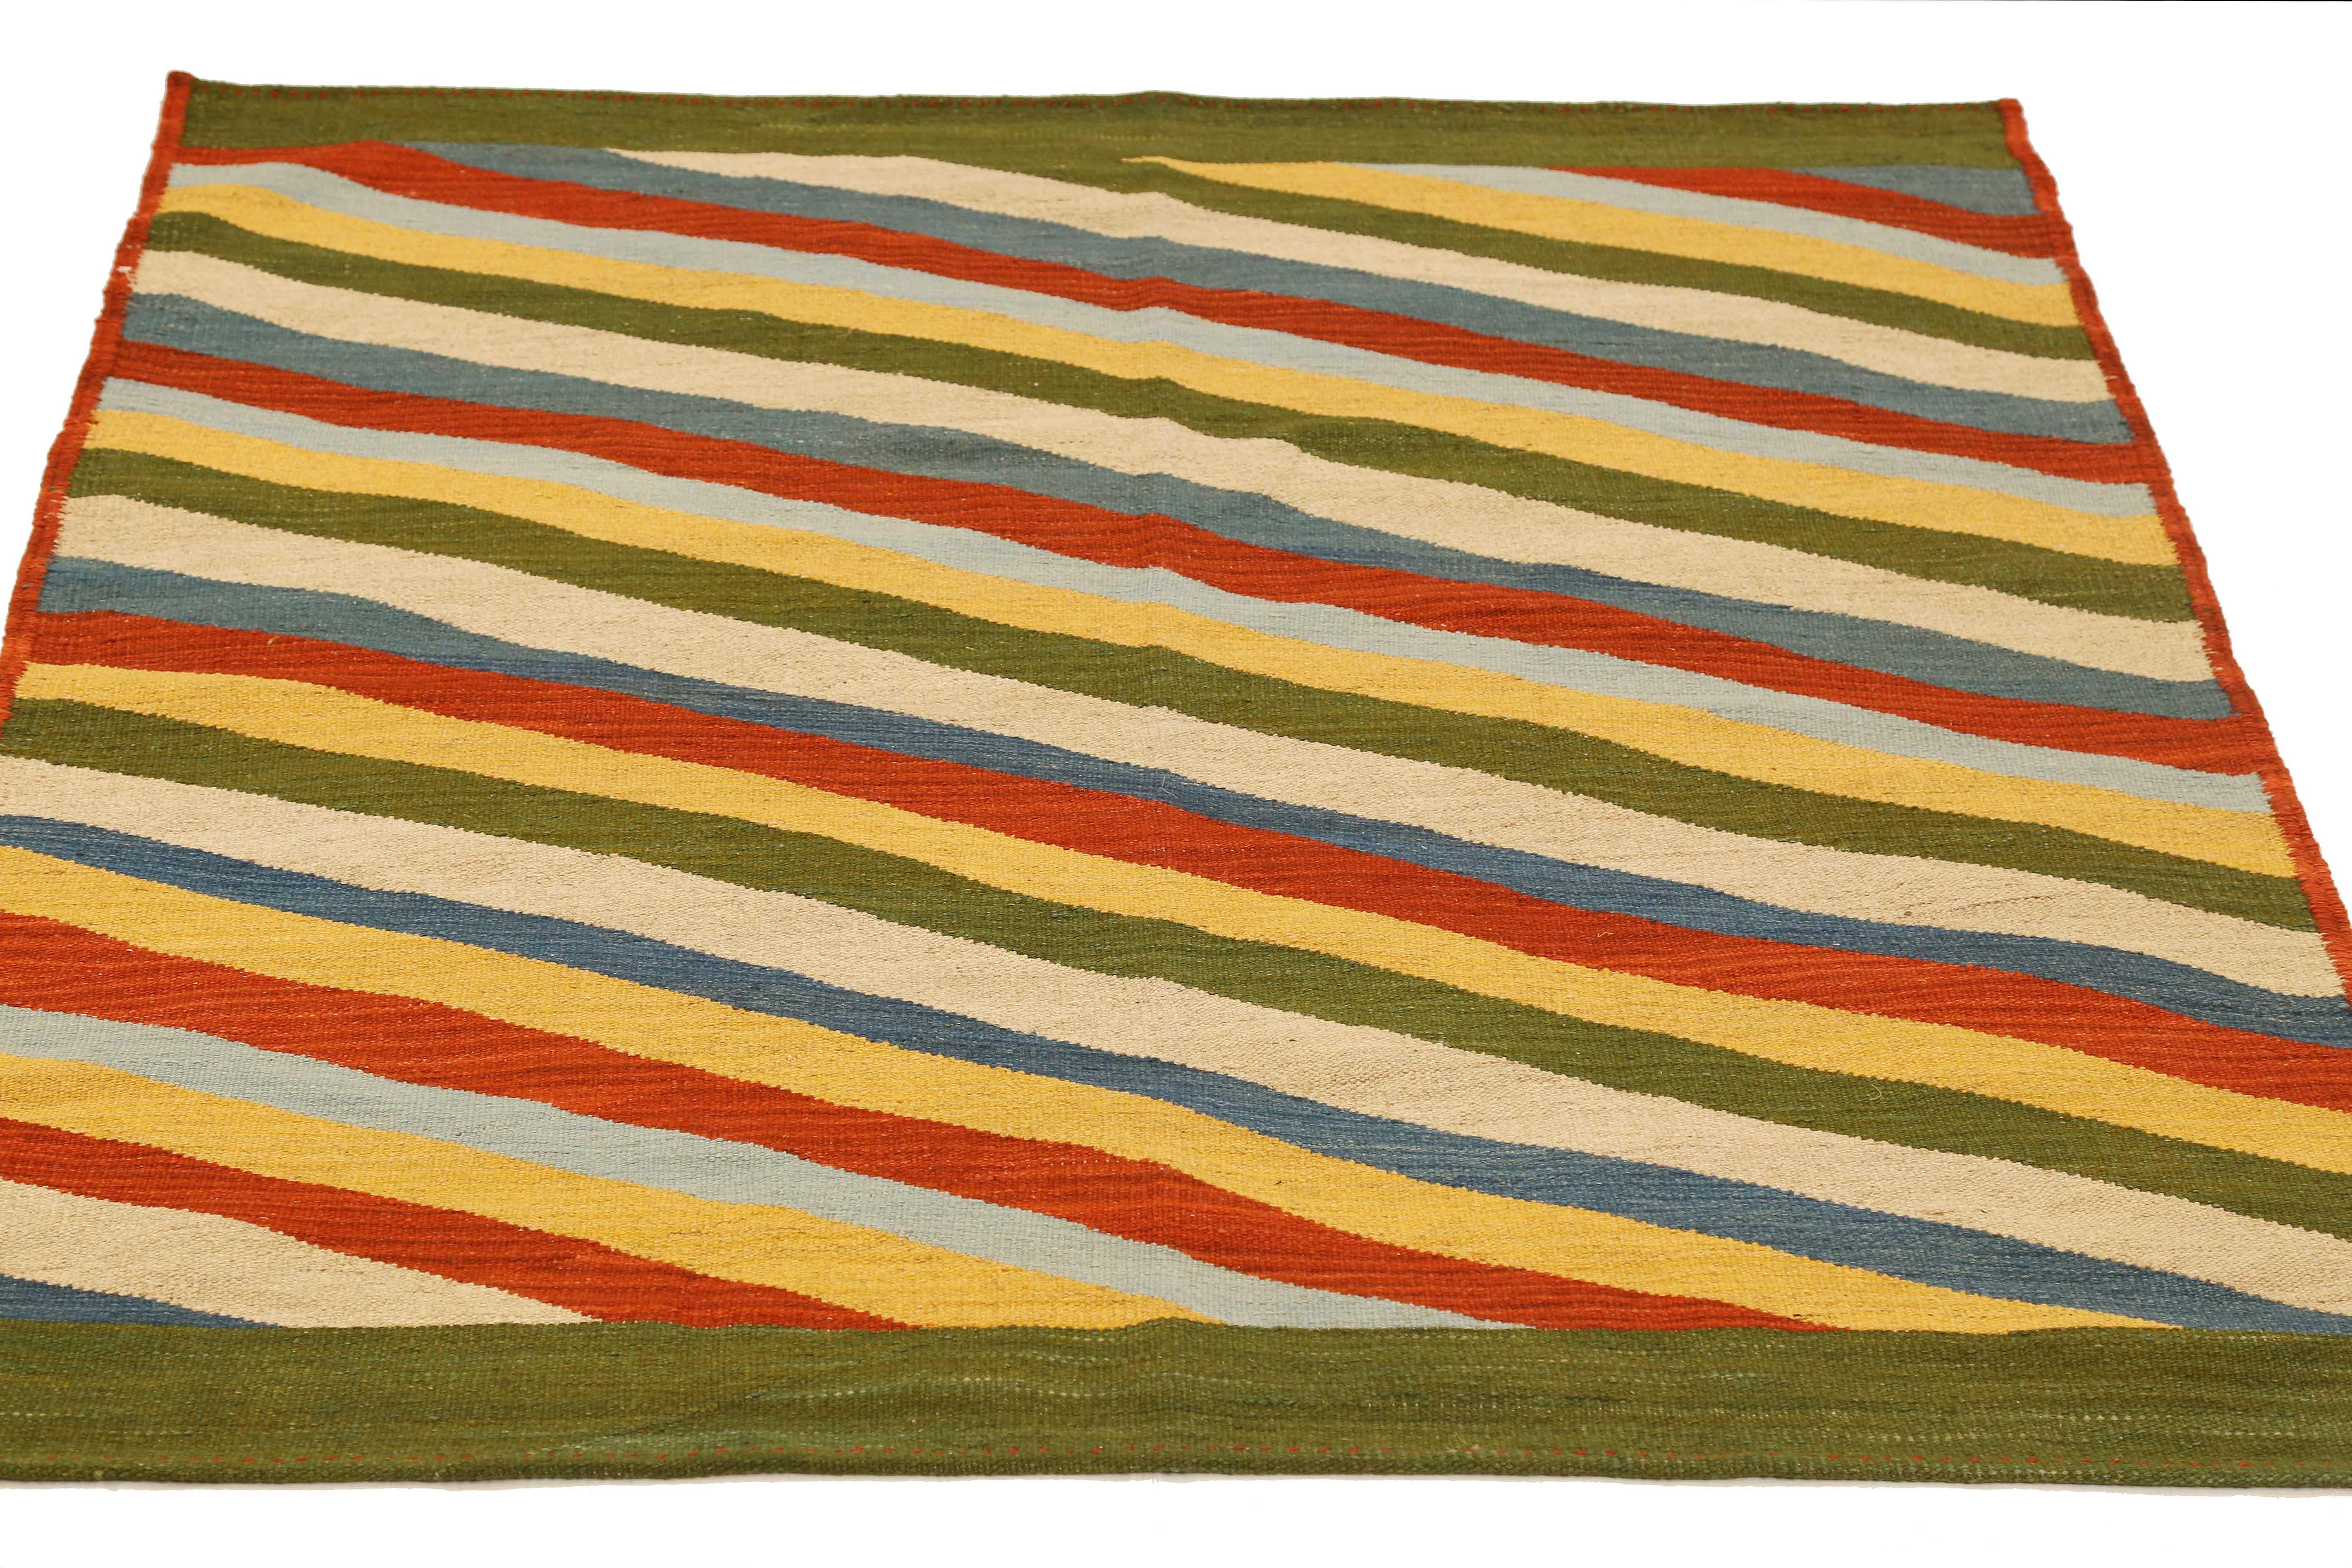 Modern Persian rug handwoven from the finest sheep’s wool and colored with all-natural vegetable dyes that are safe for humans and pets. It’s a traditional Kilim flat-weave design featuring diagonal stripes in various bright colors over a green